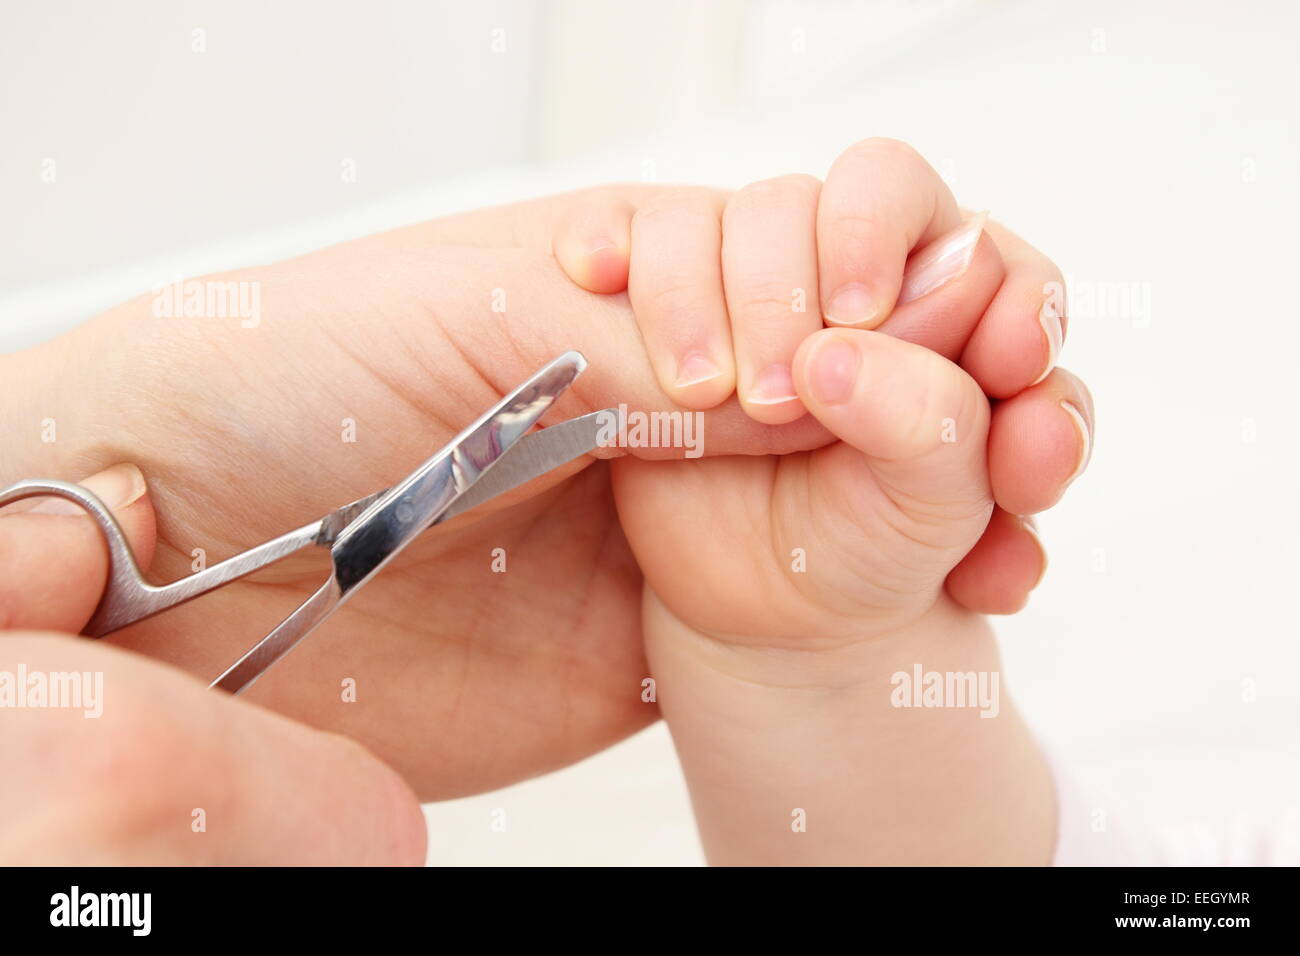 A Mother cuts fingernails of a Baby Stock Photo